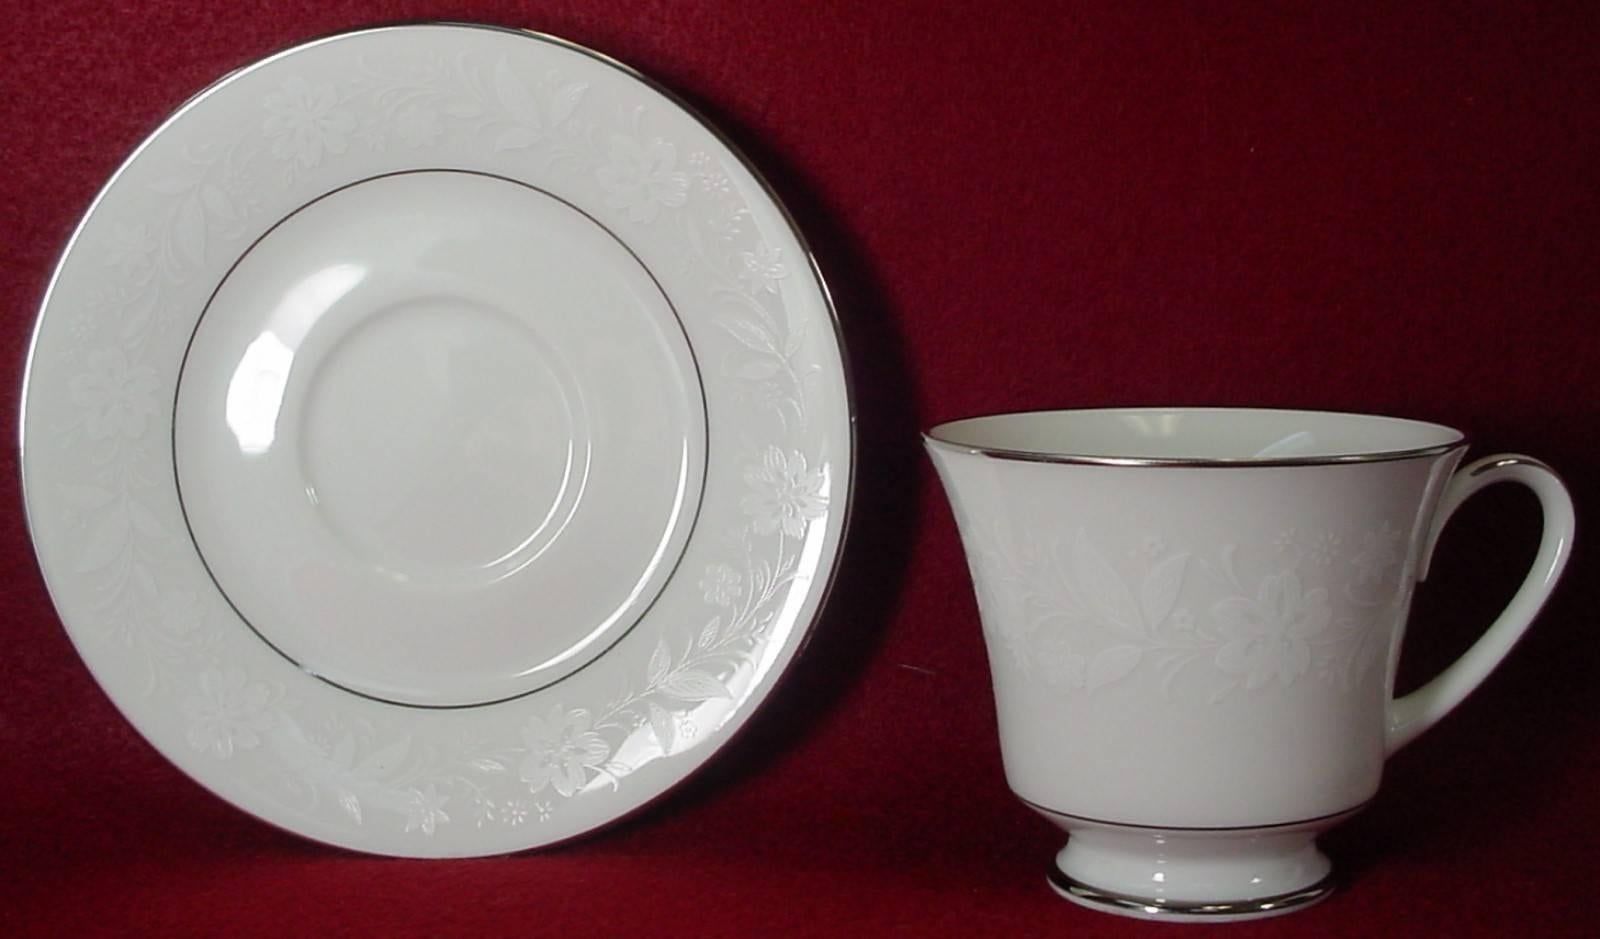 Noritake China Ranier 6909 pattern 60-piece set service for 12.

In great condition free-from chips, cracks, breaks, stains, or discoloration and with only a minimum of use. 

Production dates 1989-1994. 

Includes 12 cups, 12 saucers, 12